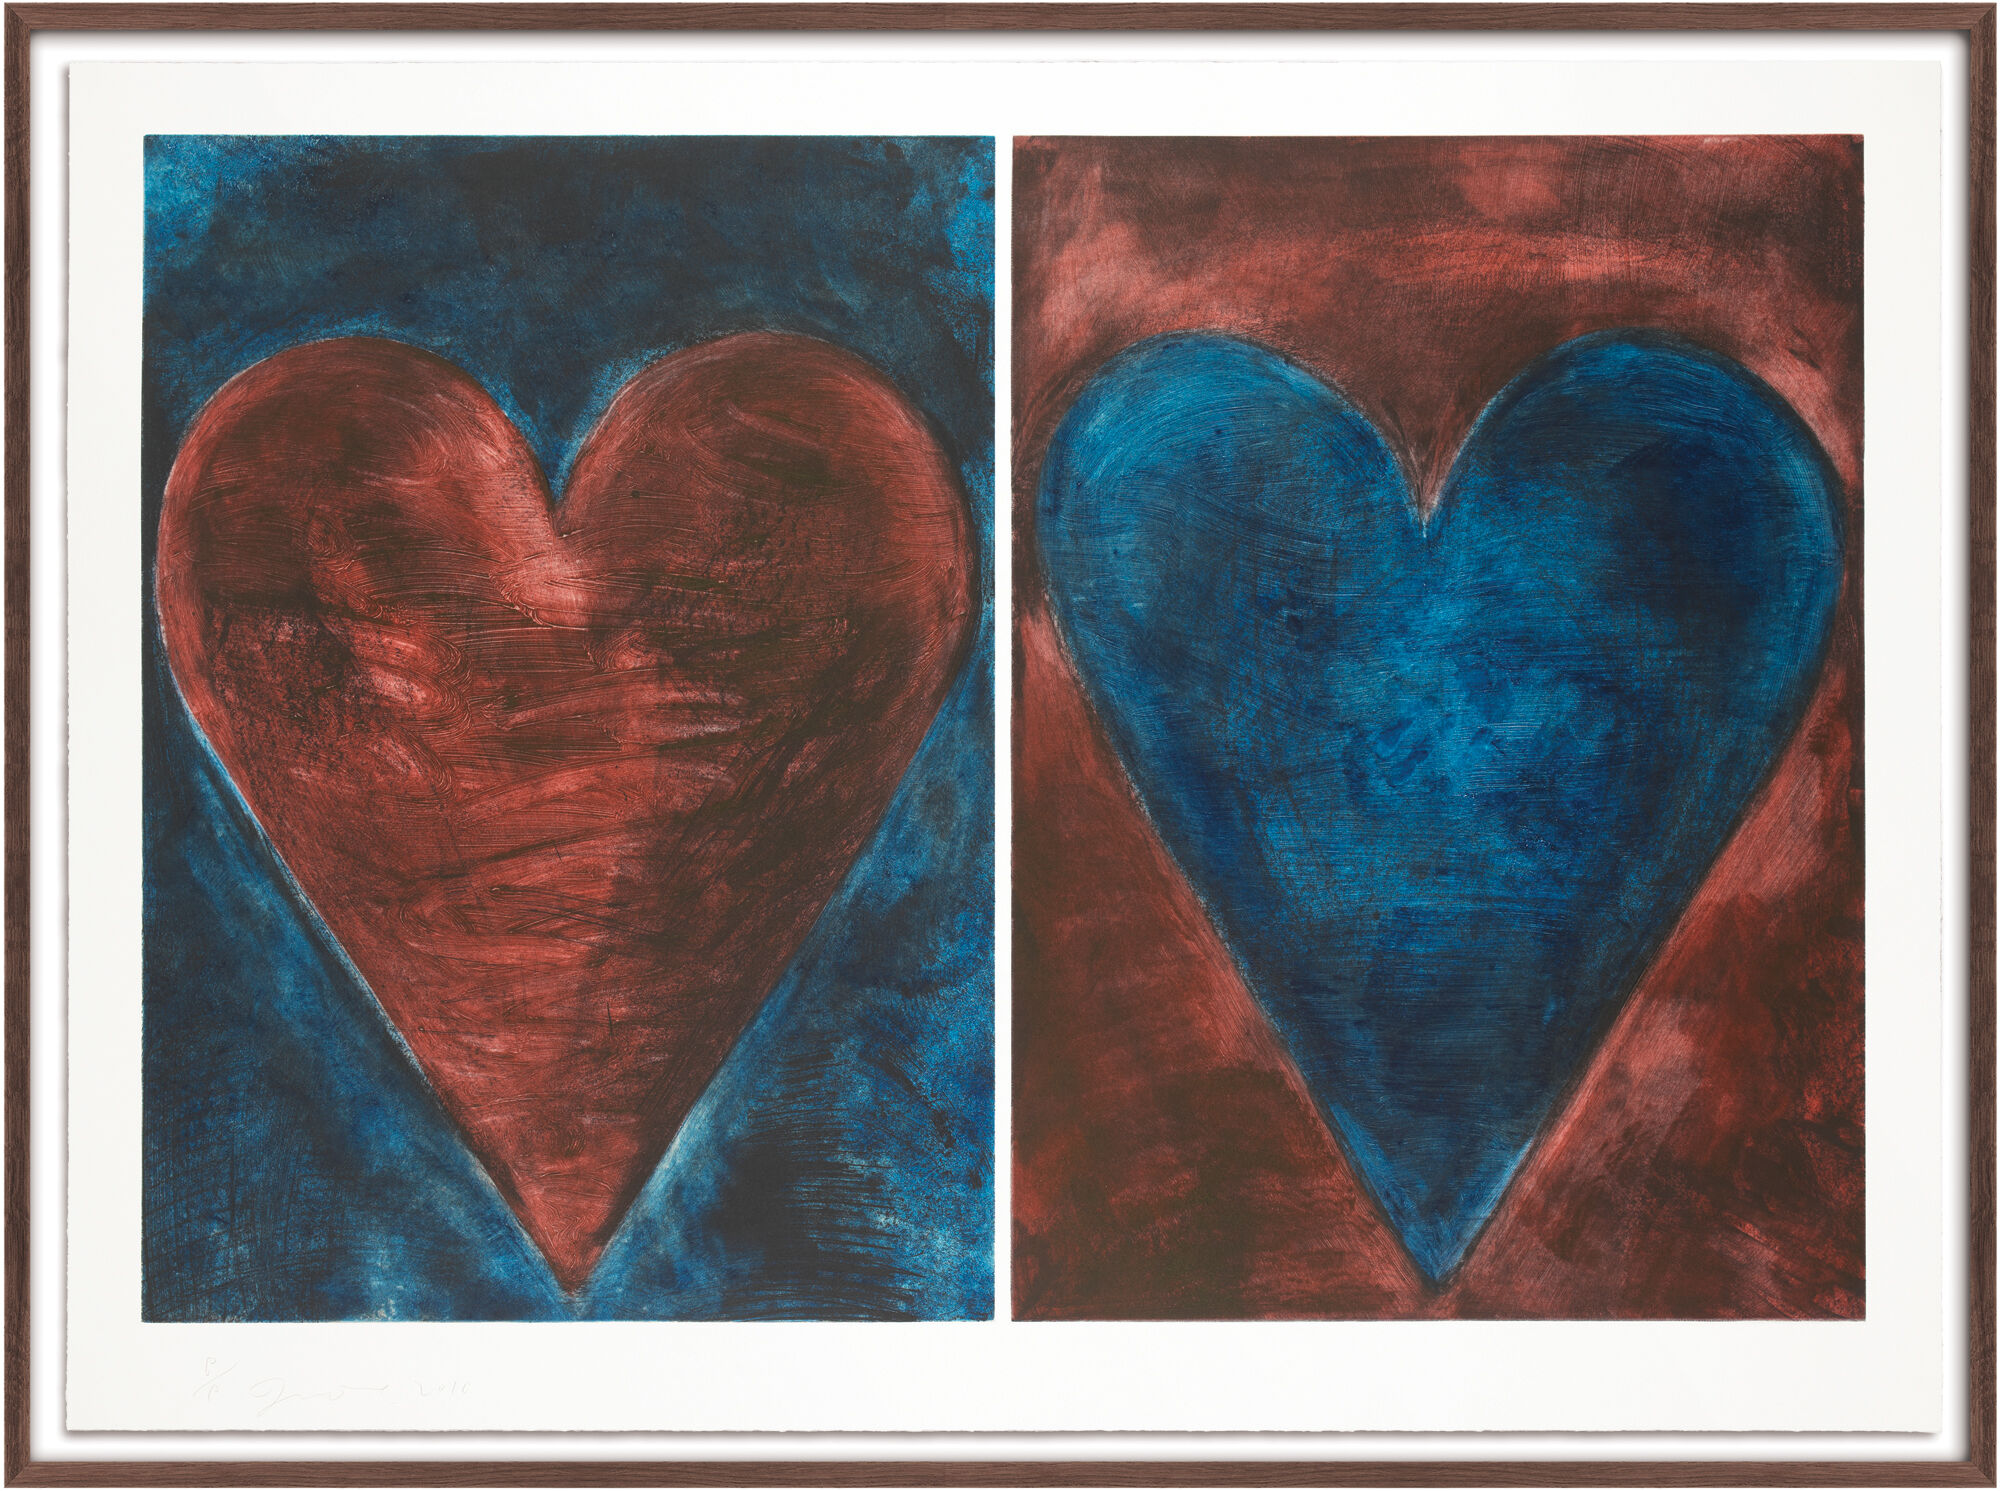 Picture "The Magnets" (2010) by Jim Dine